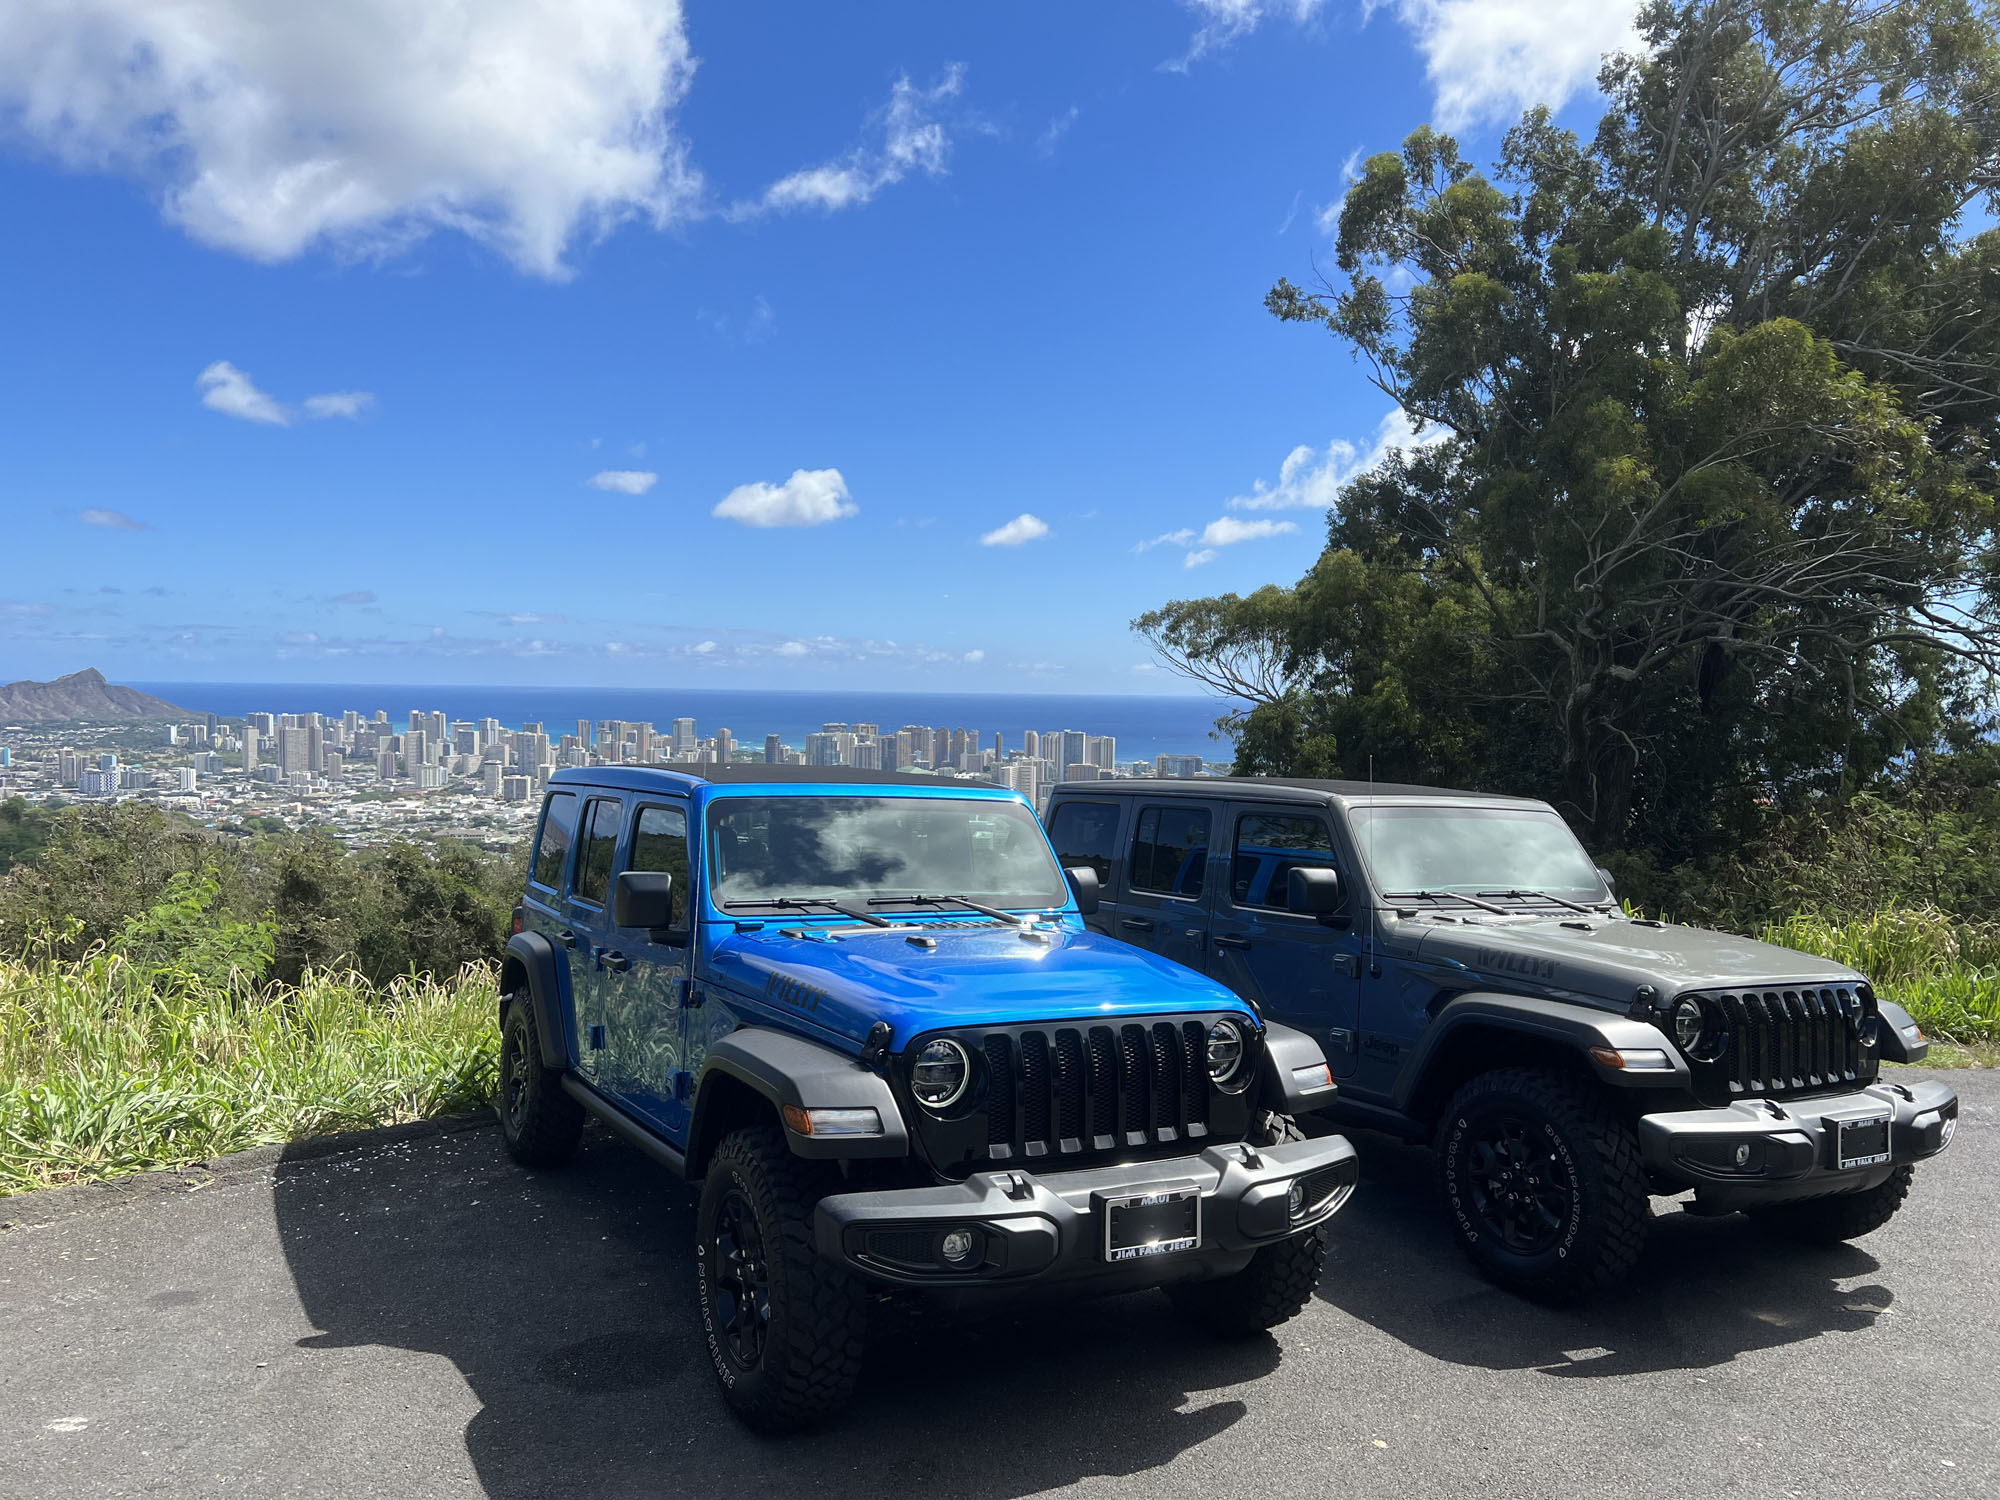 Should We Rent Jeep Or Convertible In Honolulu